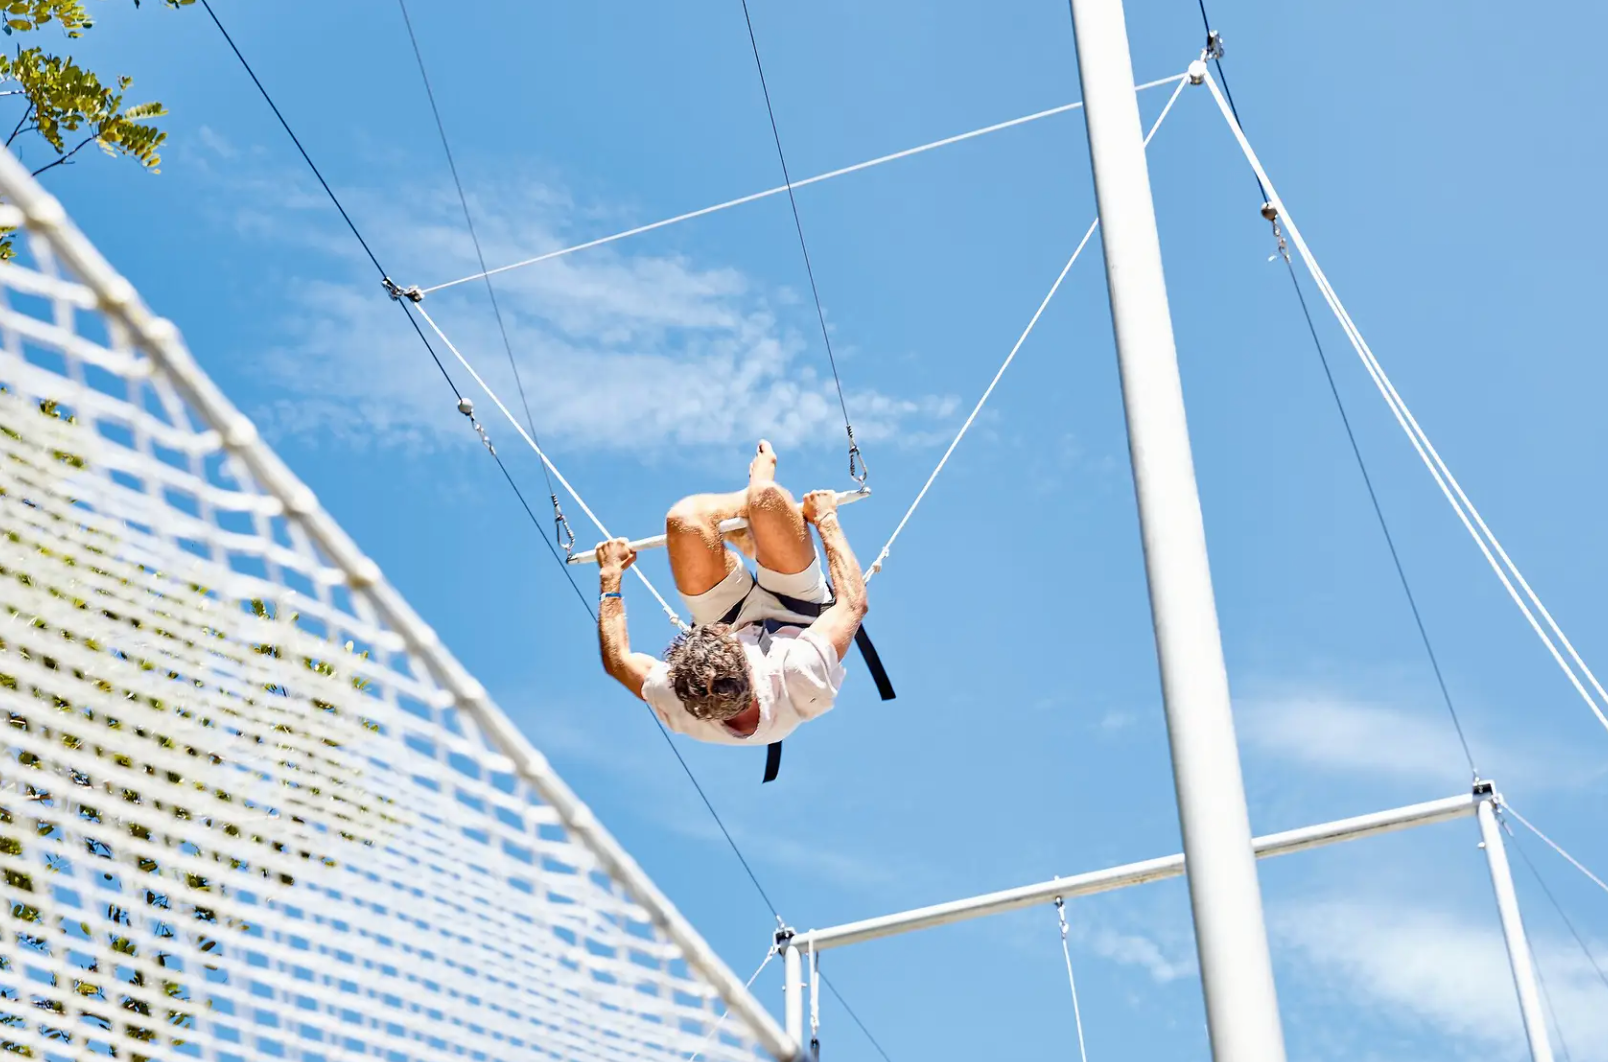 The resort’s playground, designed by Cirque du Soleil, includes a flying trapeze for kids and grown-ups alike